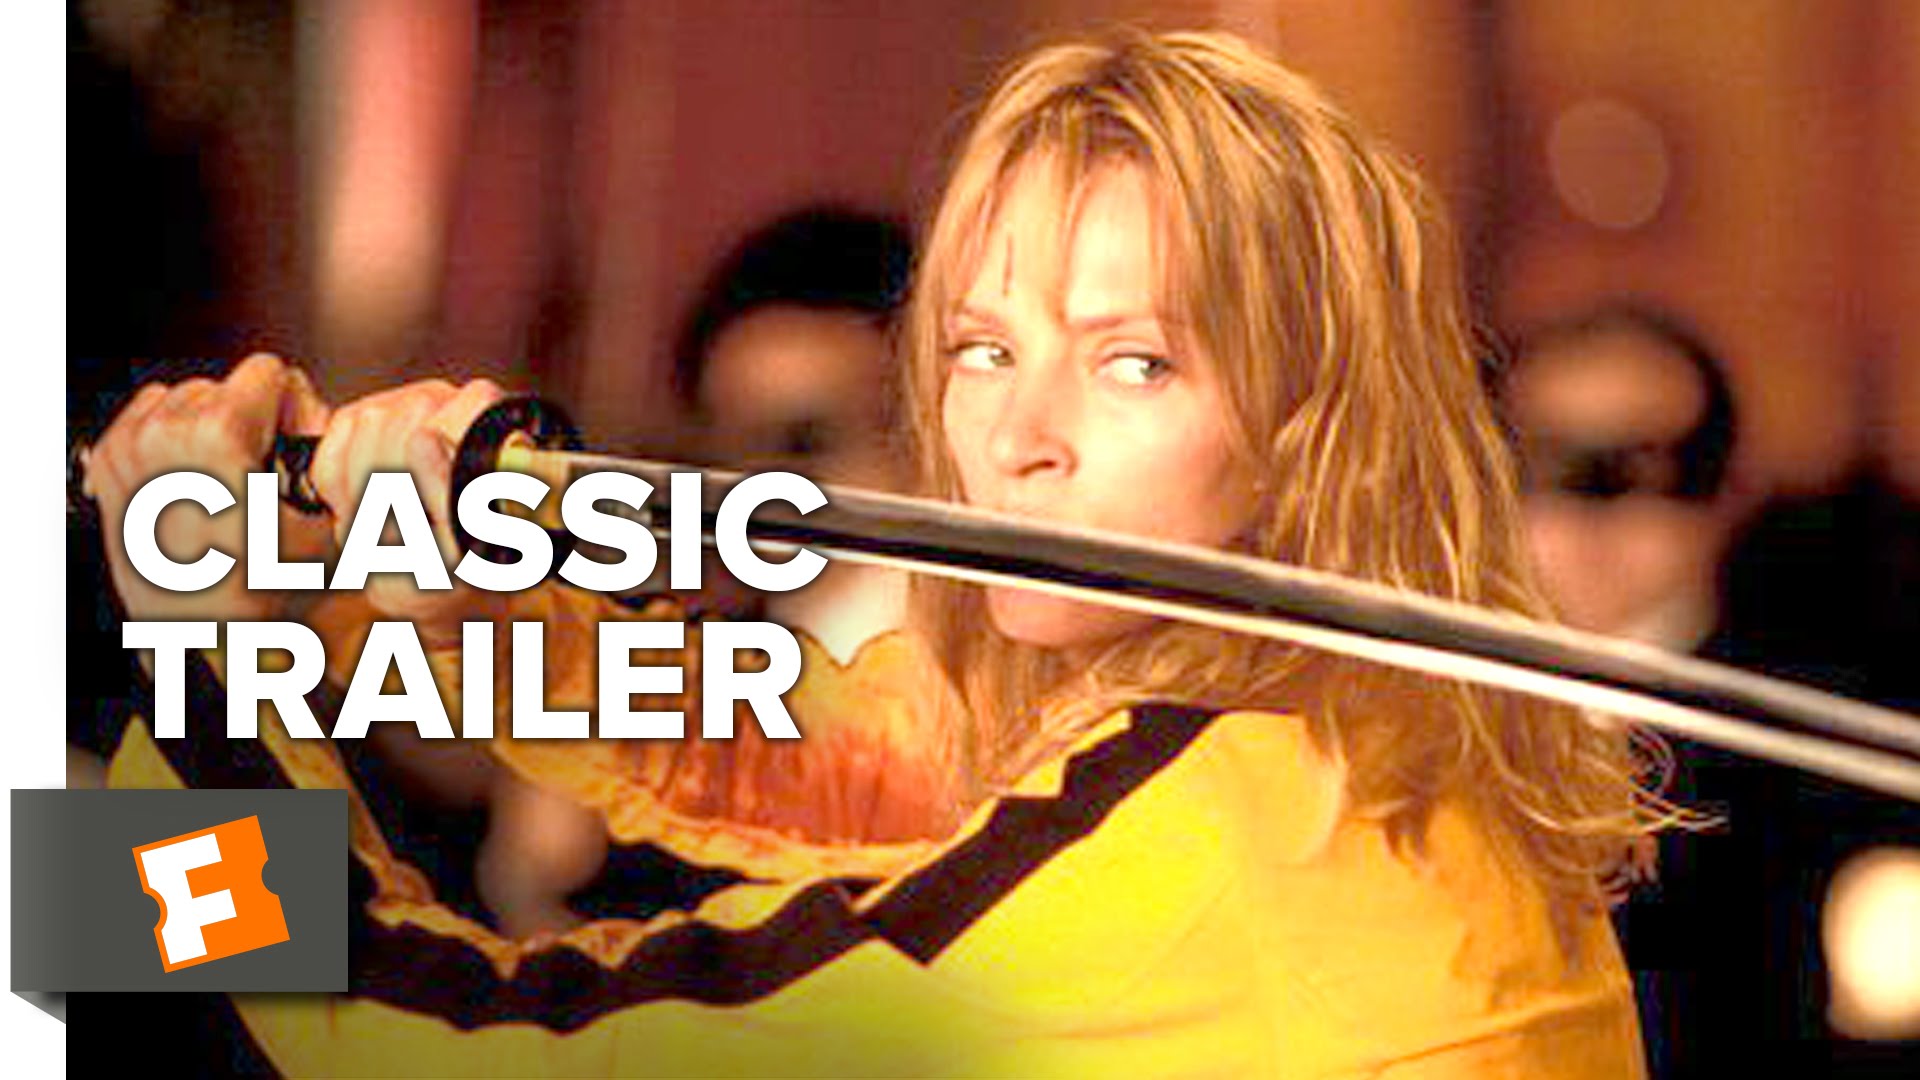 Kill Bill Backgrounds, Compatible - PC, Mobile, Gadgets| 1920x1080 px